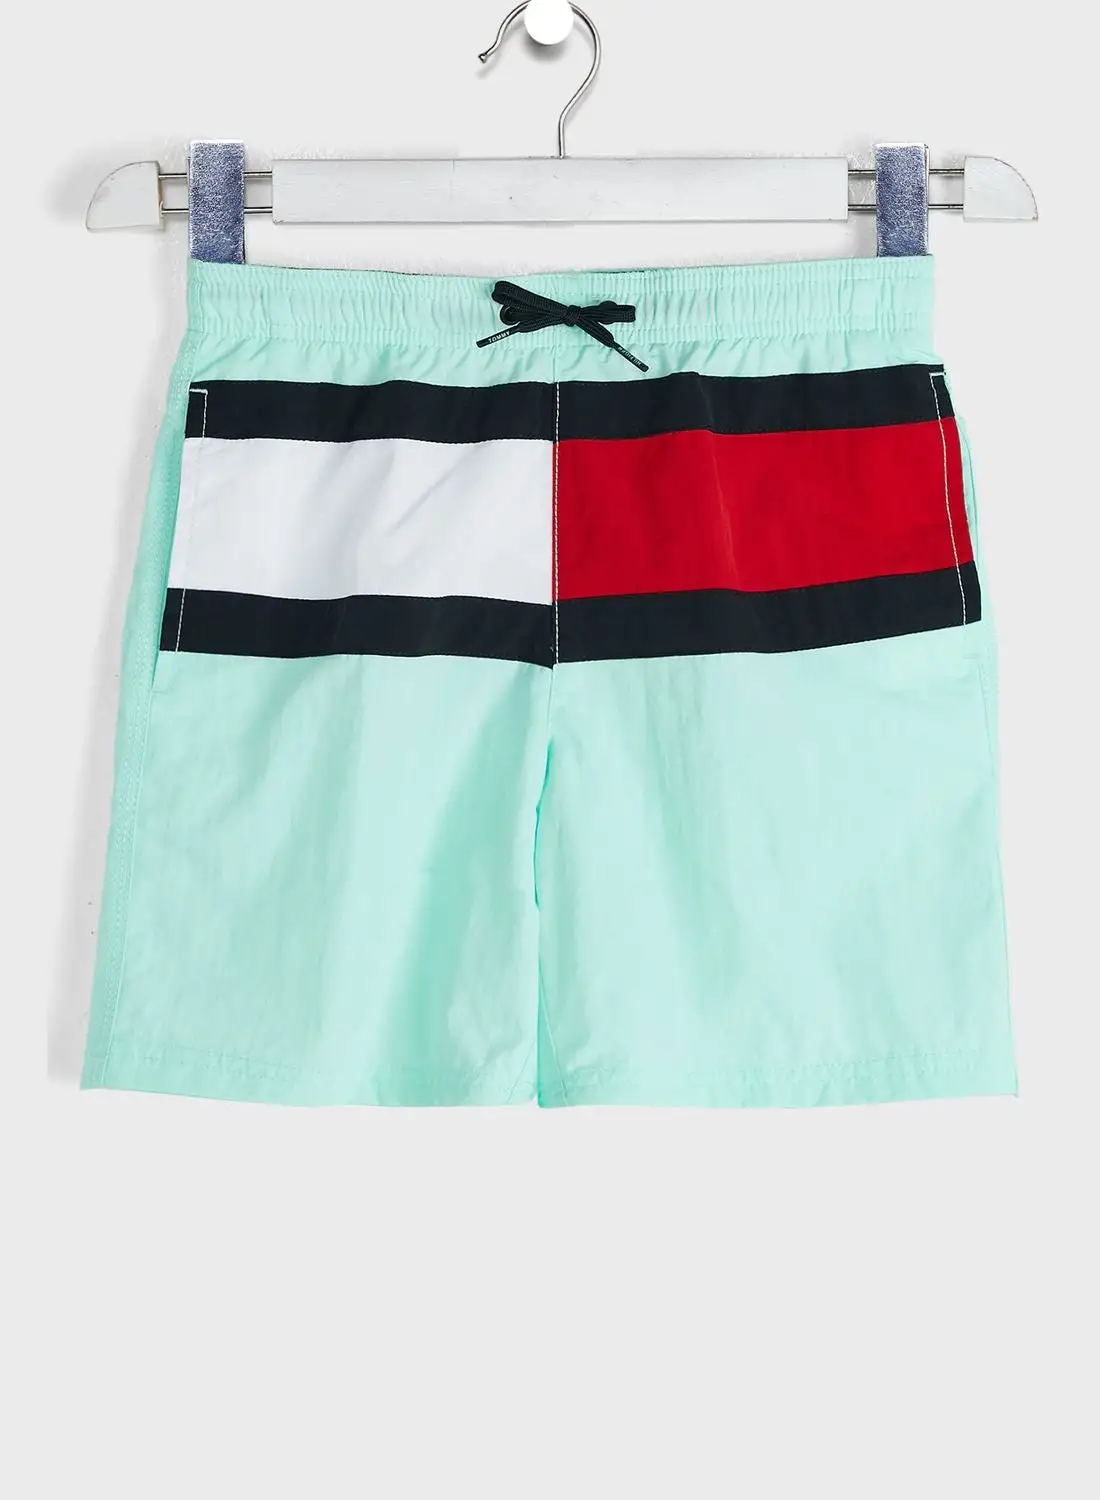 TOMMY HILFIGER Youth Colour Block Shorts